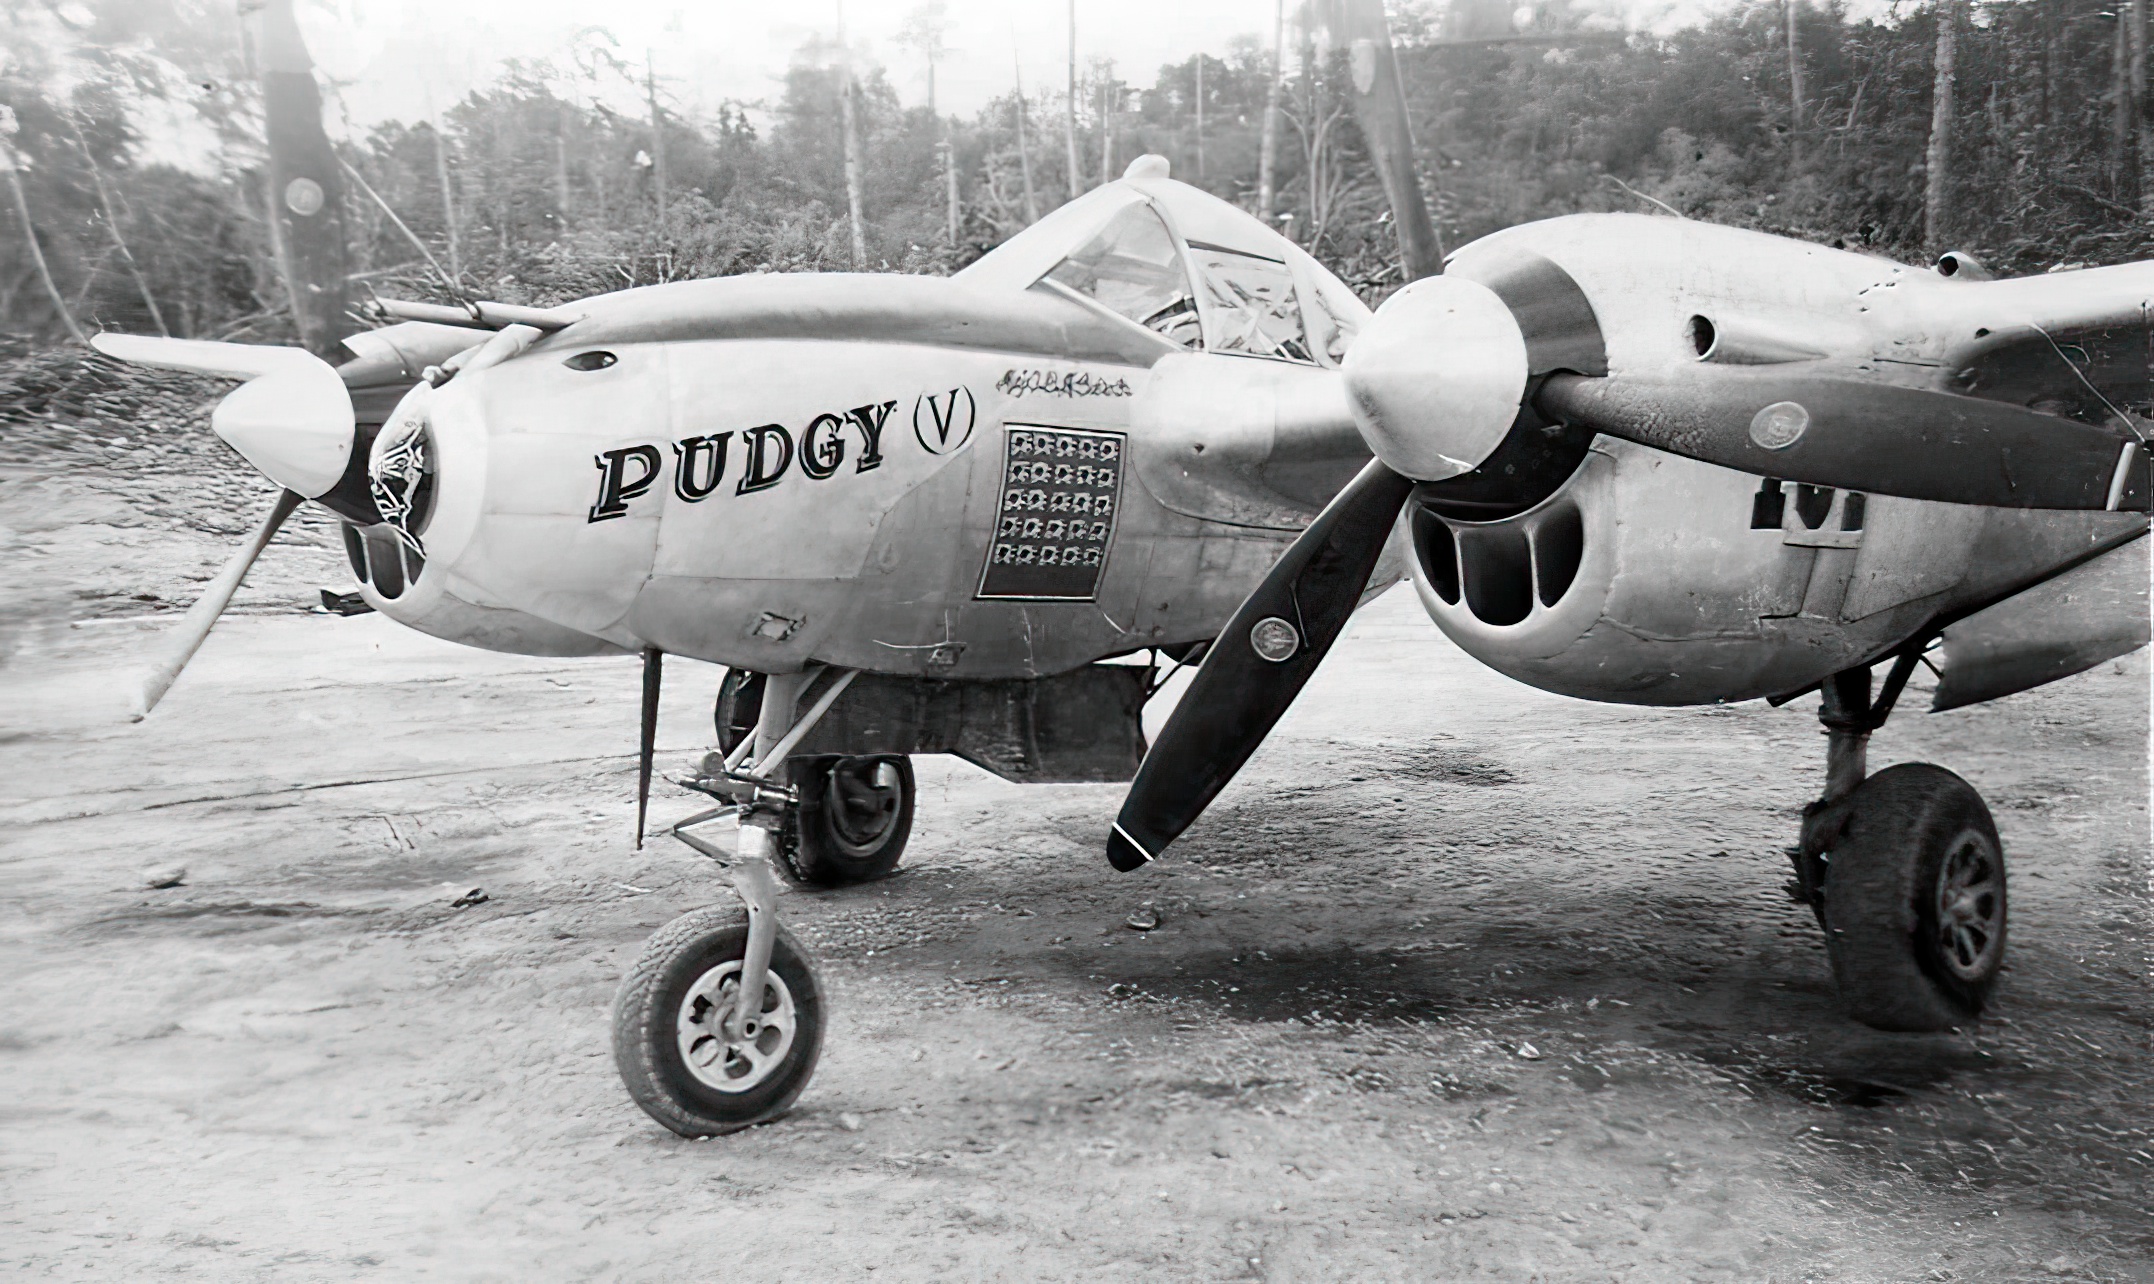 P-38L Lightning (44-24155) nicknamed “Pudgy V”; pilot Maj Thomas McGuire of the 431st Fighter Squadron, 475th Fighter Group, Luzon